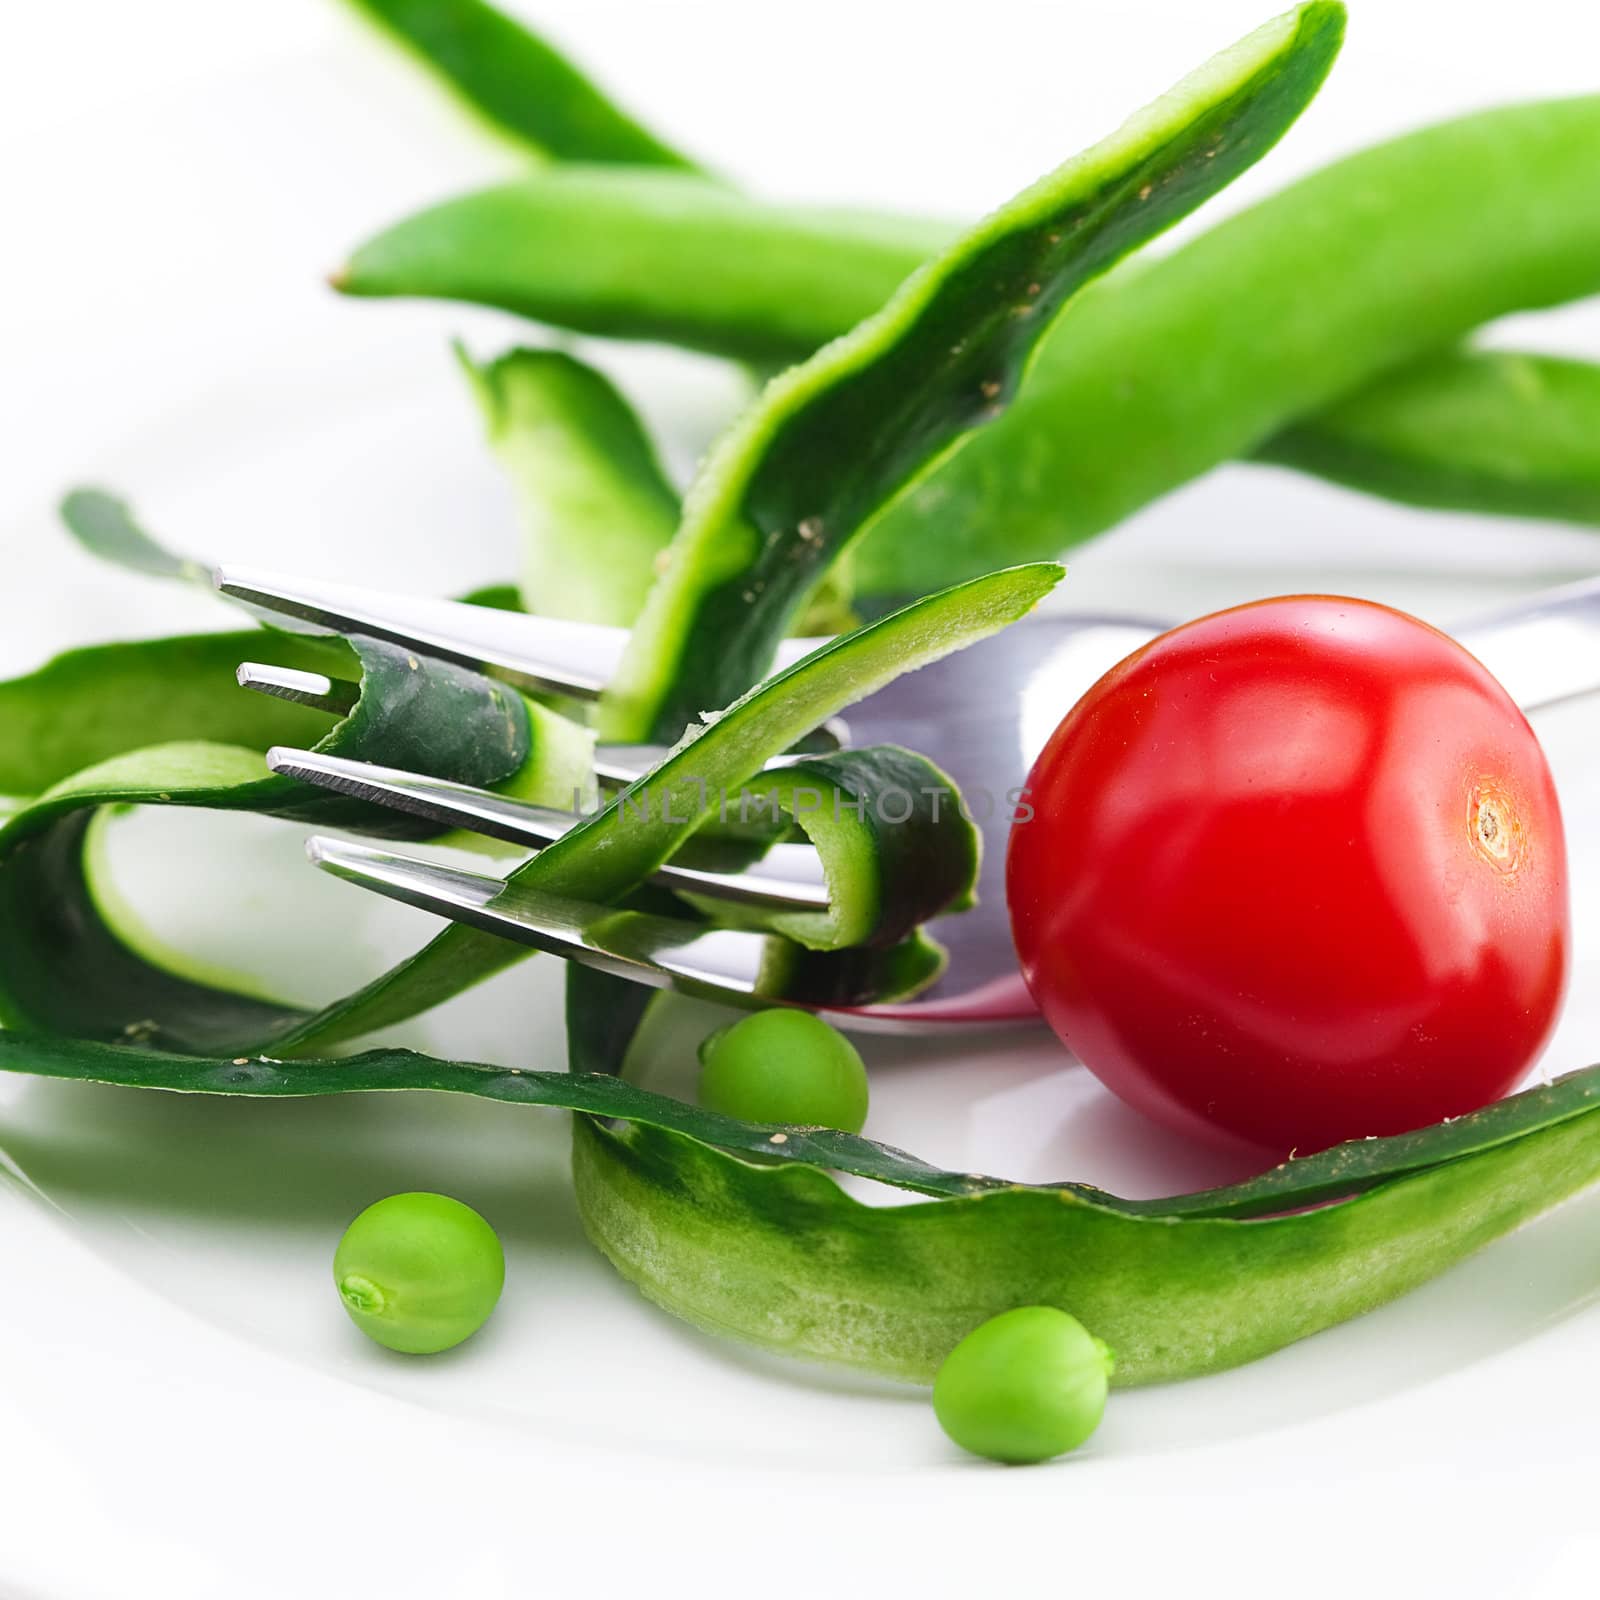 tomato,fork ,cucumber skin,peas and measure tape on a plate isolated on white